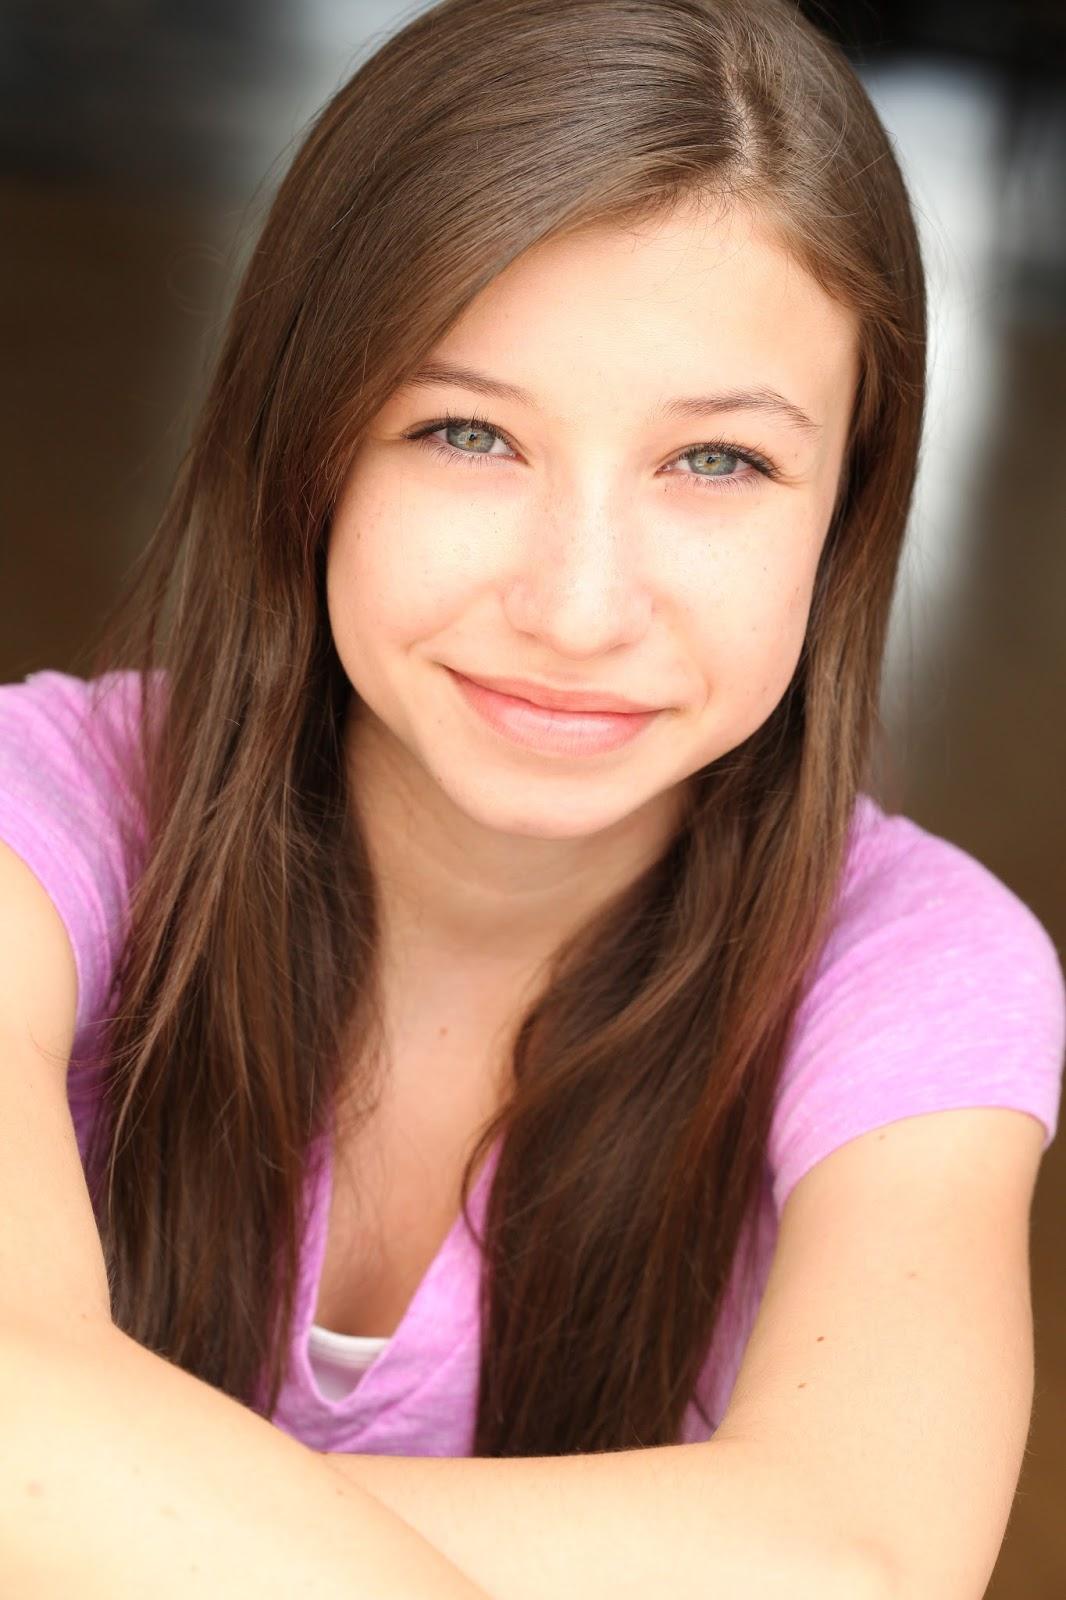 70+ Hot Pictures Of Katelyn Nacon Which Are Sure to Catch Your Attention 263